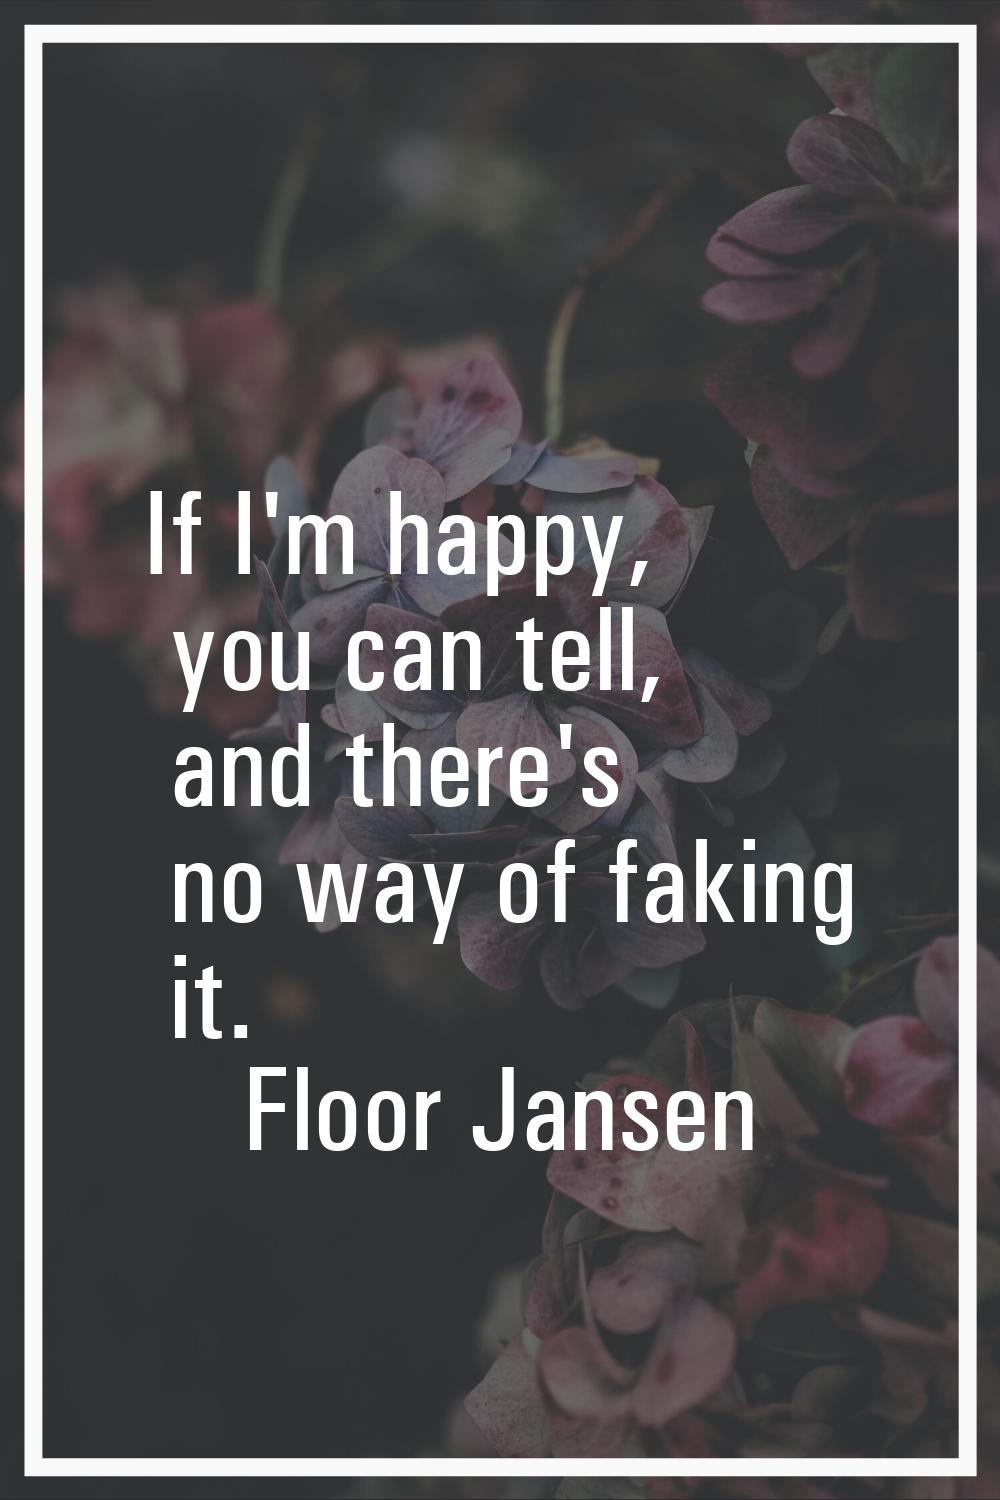 If I'm happy, you can tell, and there's no way of faking it.